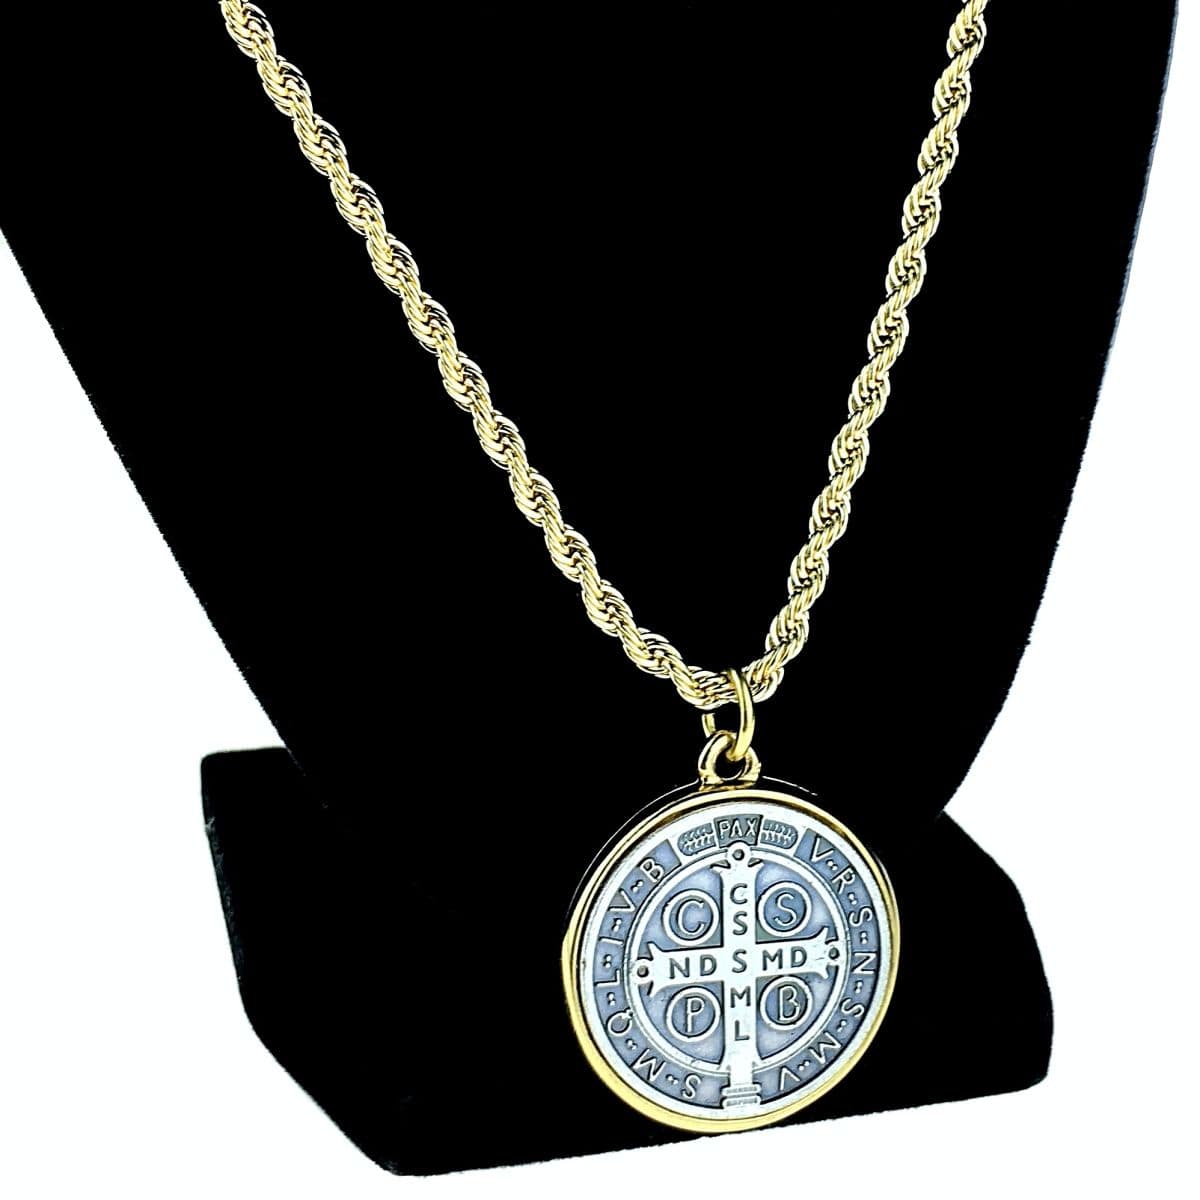 925 Sterling Silver Four 4-Way Cross Medal Medalla Milagrosa Miraculous  Pendant